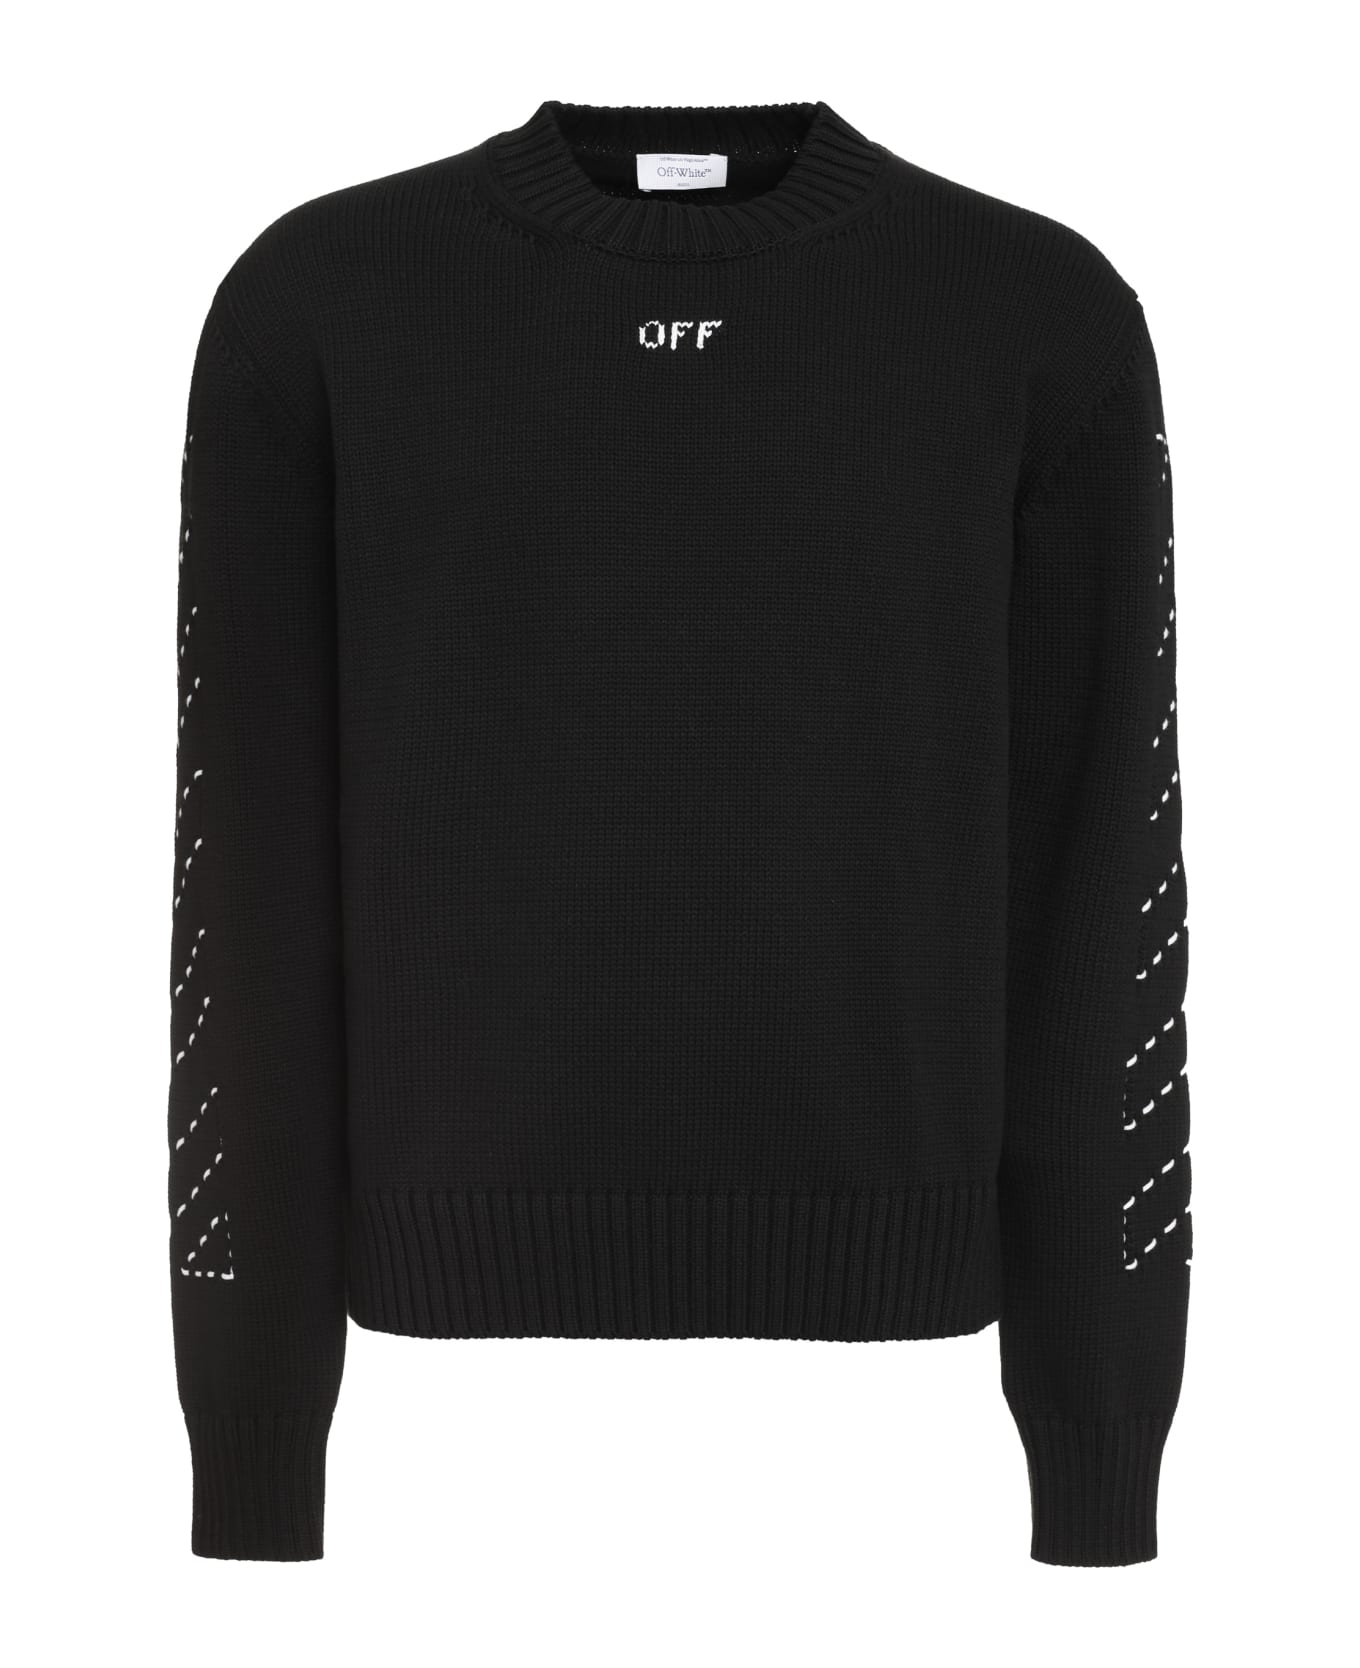 Off-White Stitch Arrows Diags Sweater - black ニットウェア